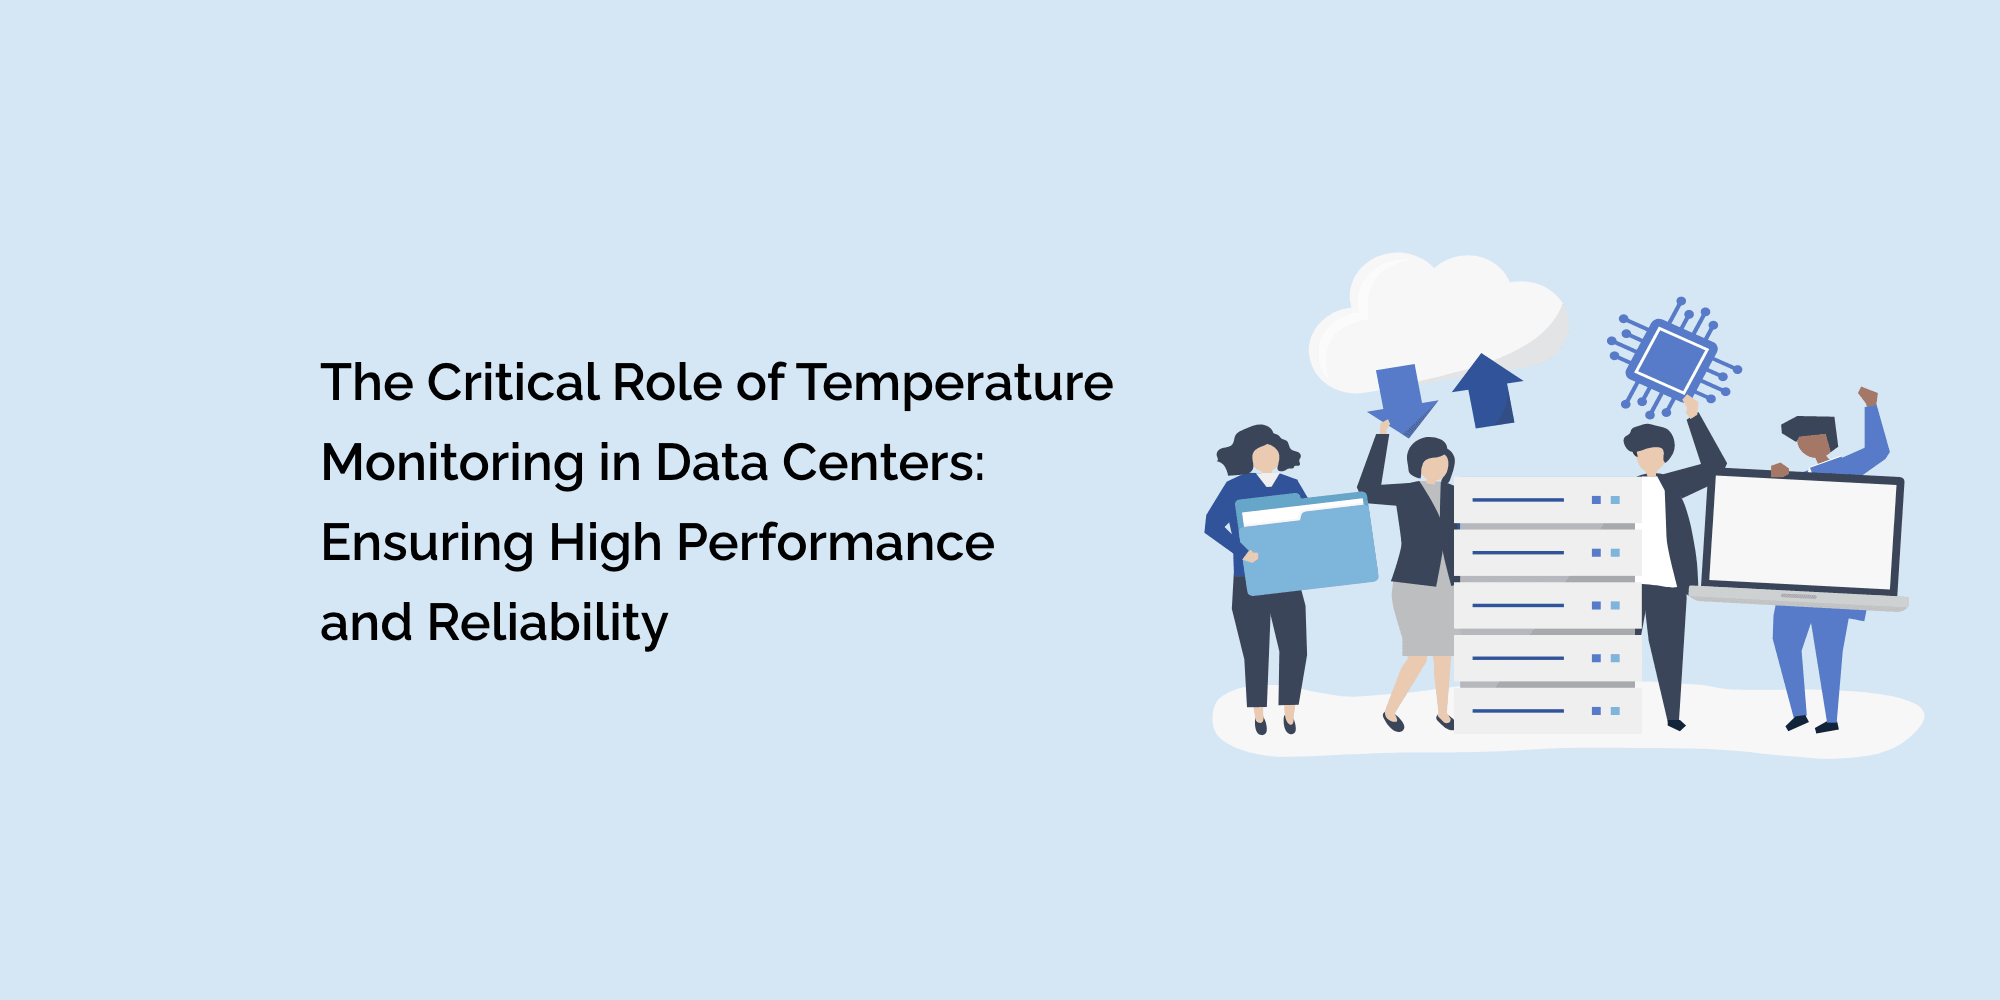 The Critical Role of Temperature Monitoring in Data Centers: Ensuring High Performance and Reliability